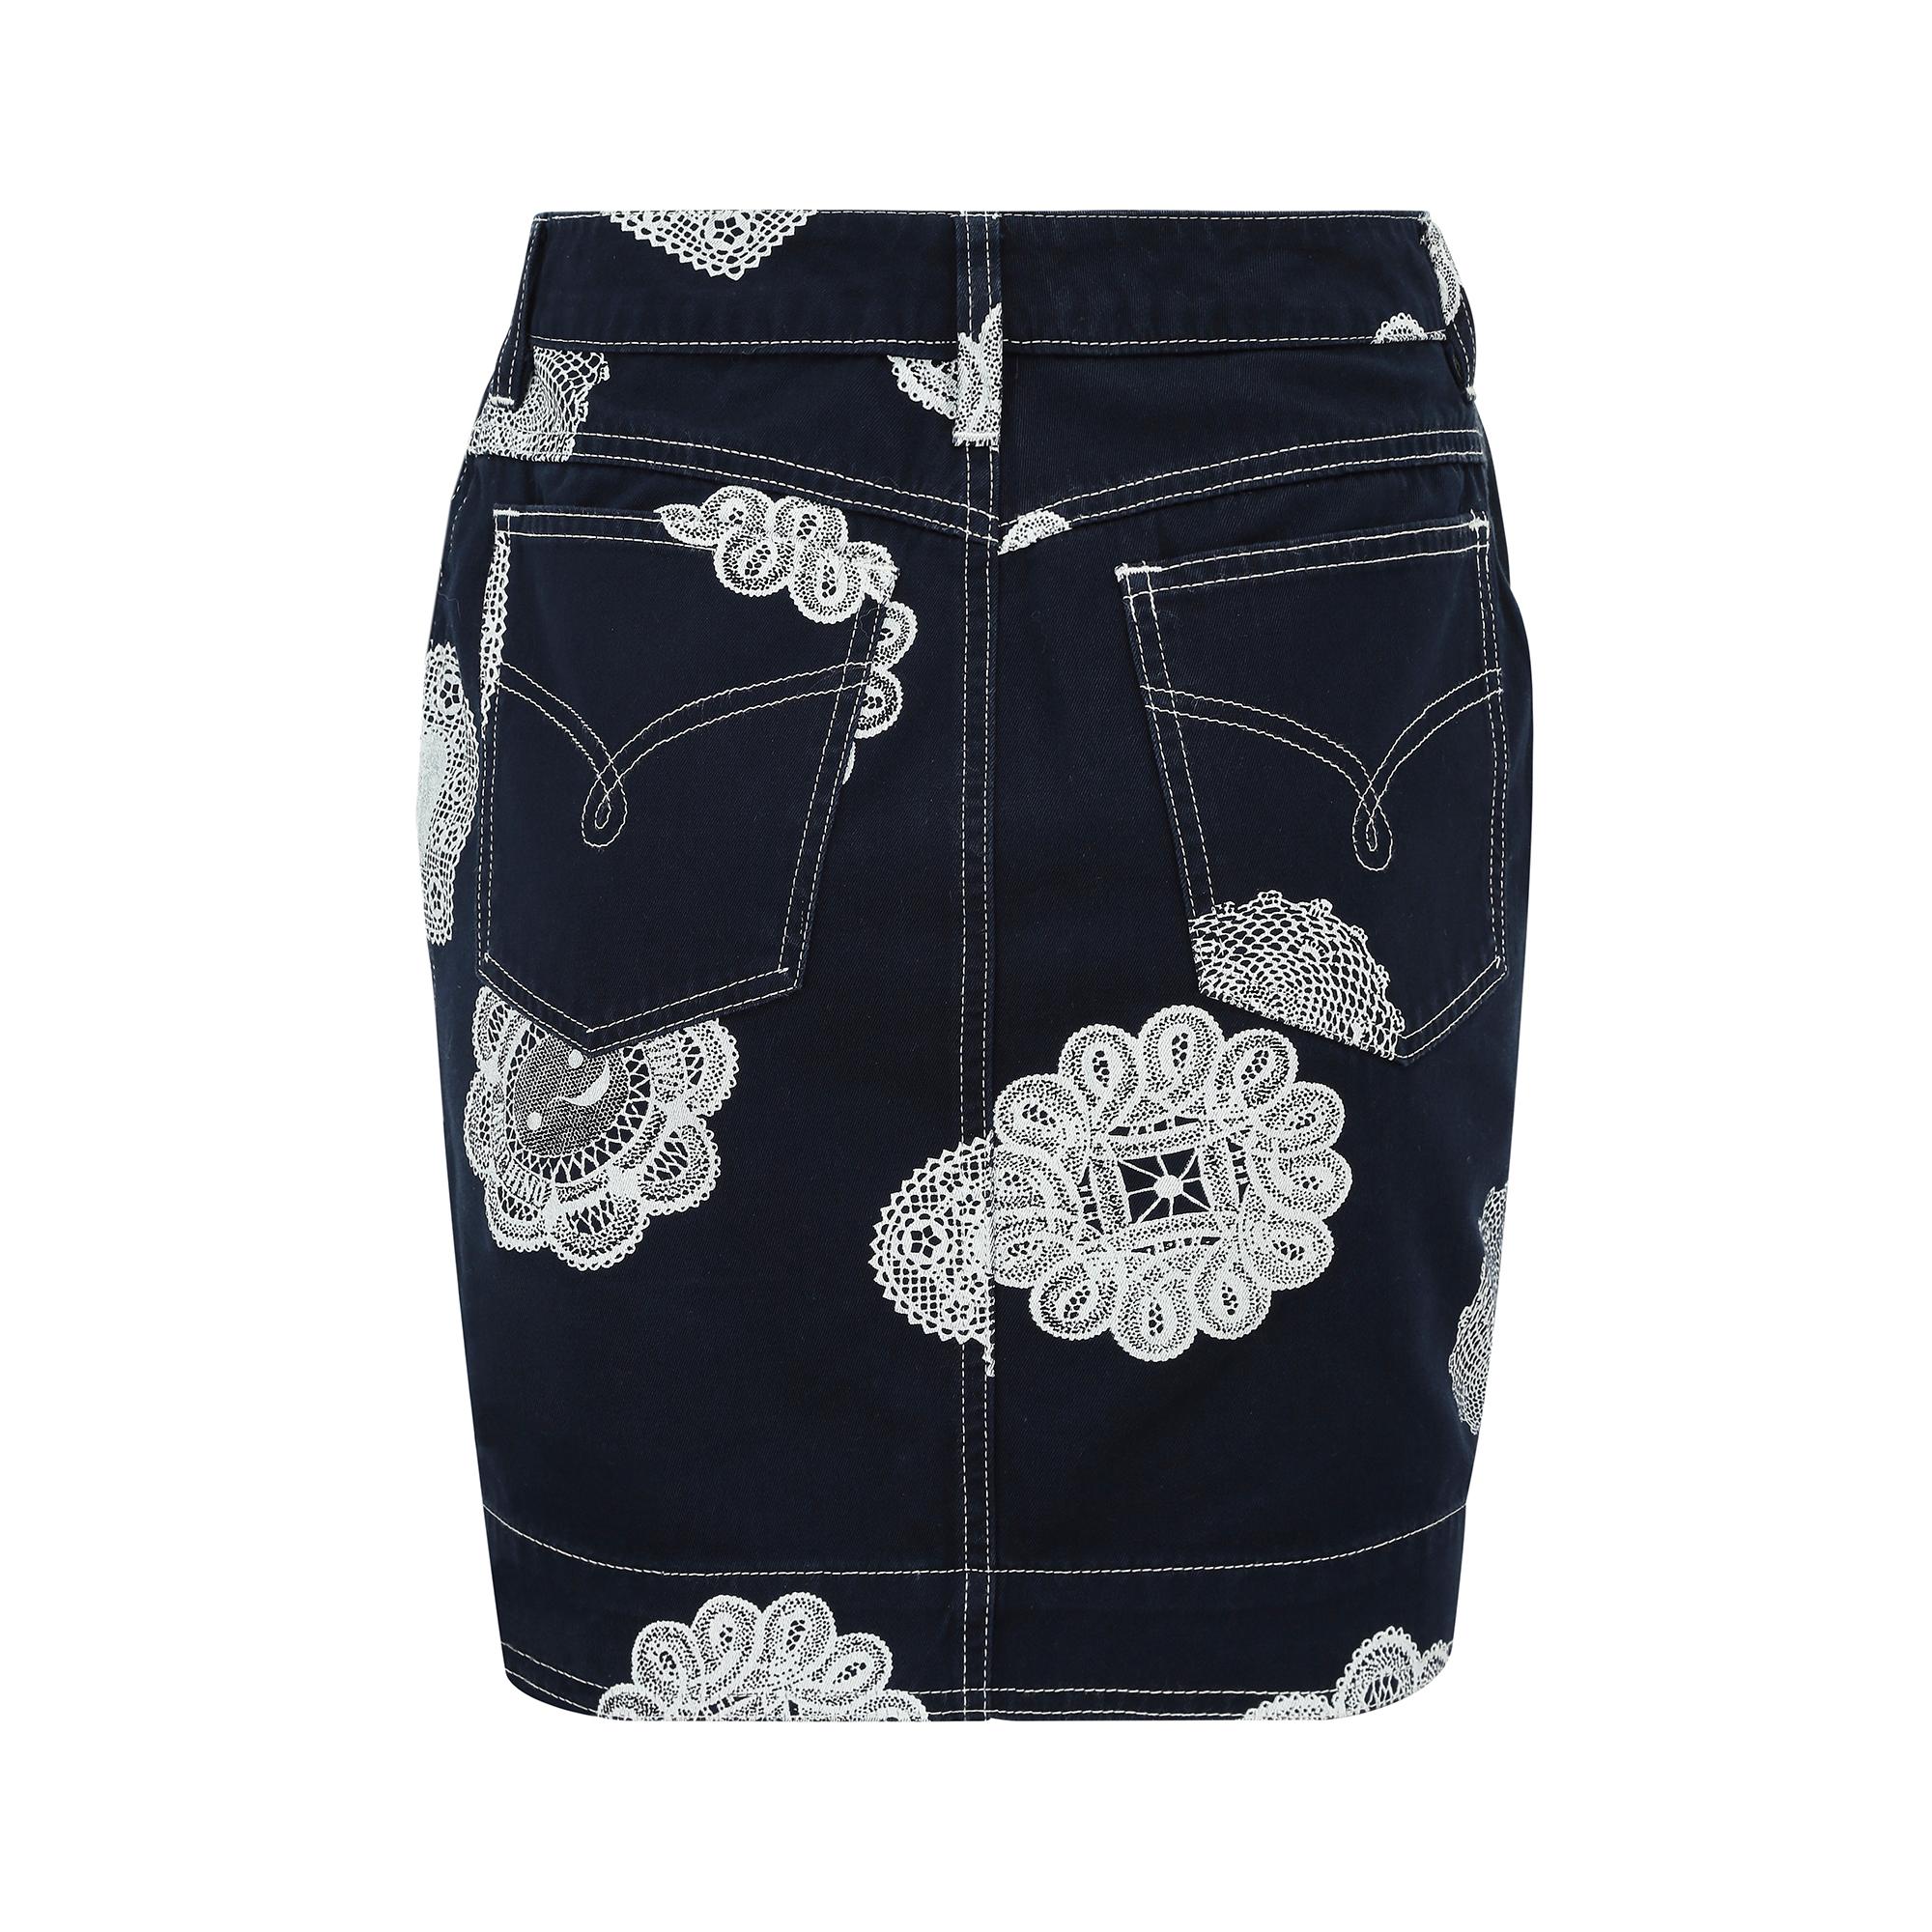 1990s Moschino Denim and Doily Novelty Print Mini Skirt In Excellent Condition For Sale In London, GB